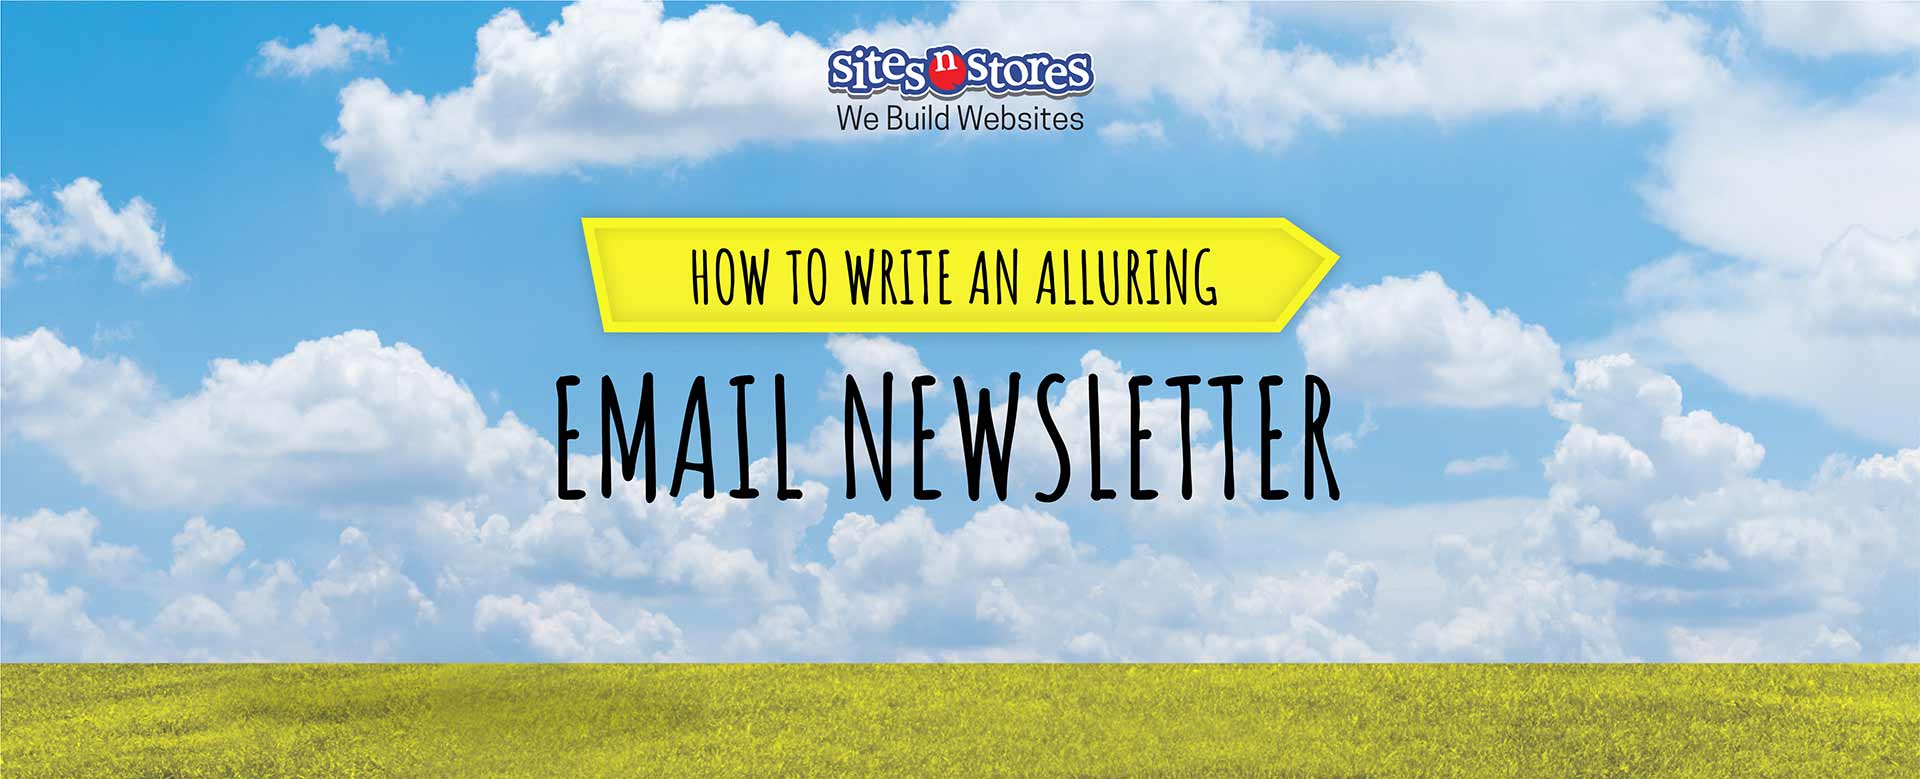 How To Write An Alluring Email Newsletter